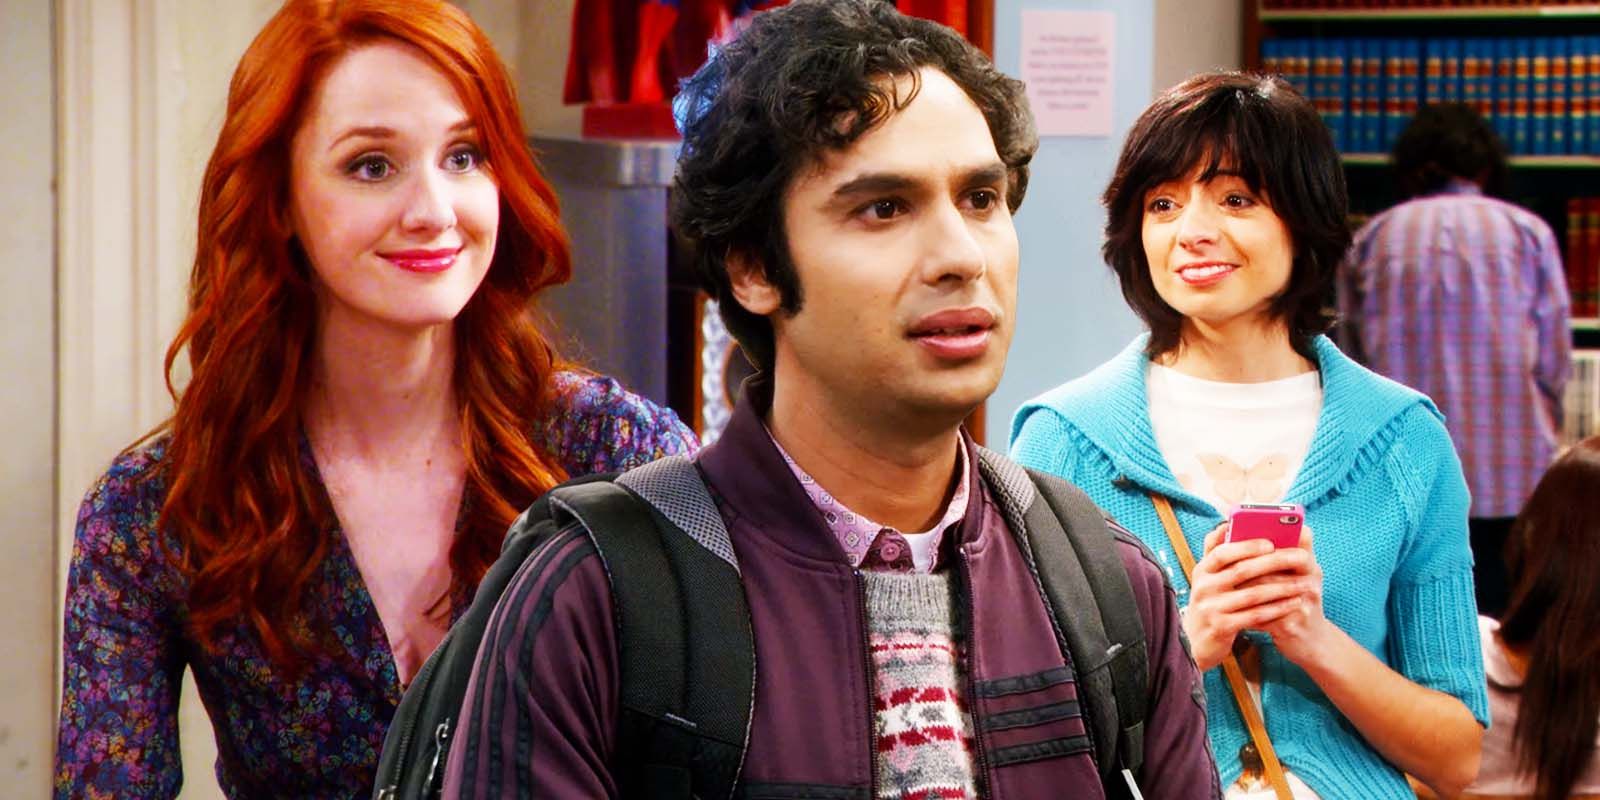 Laura Spencer as Emily Sweeney, Kunal Nayyar as Raj and Kate Micucci as Lucy in The Big Bang Theory